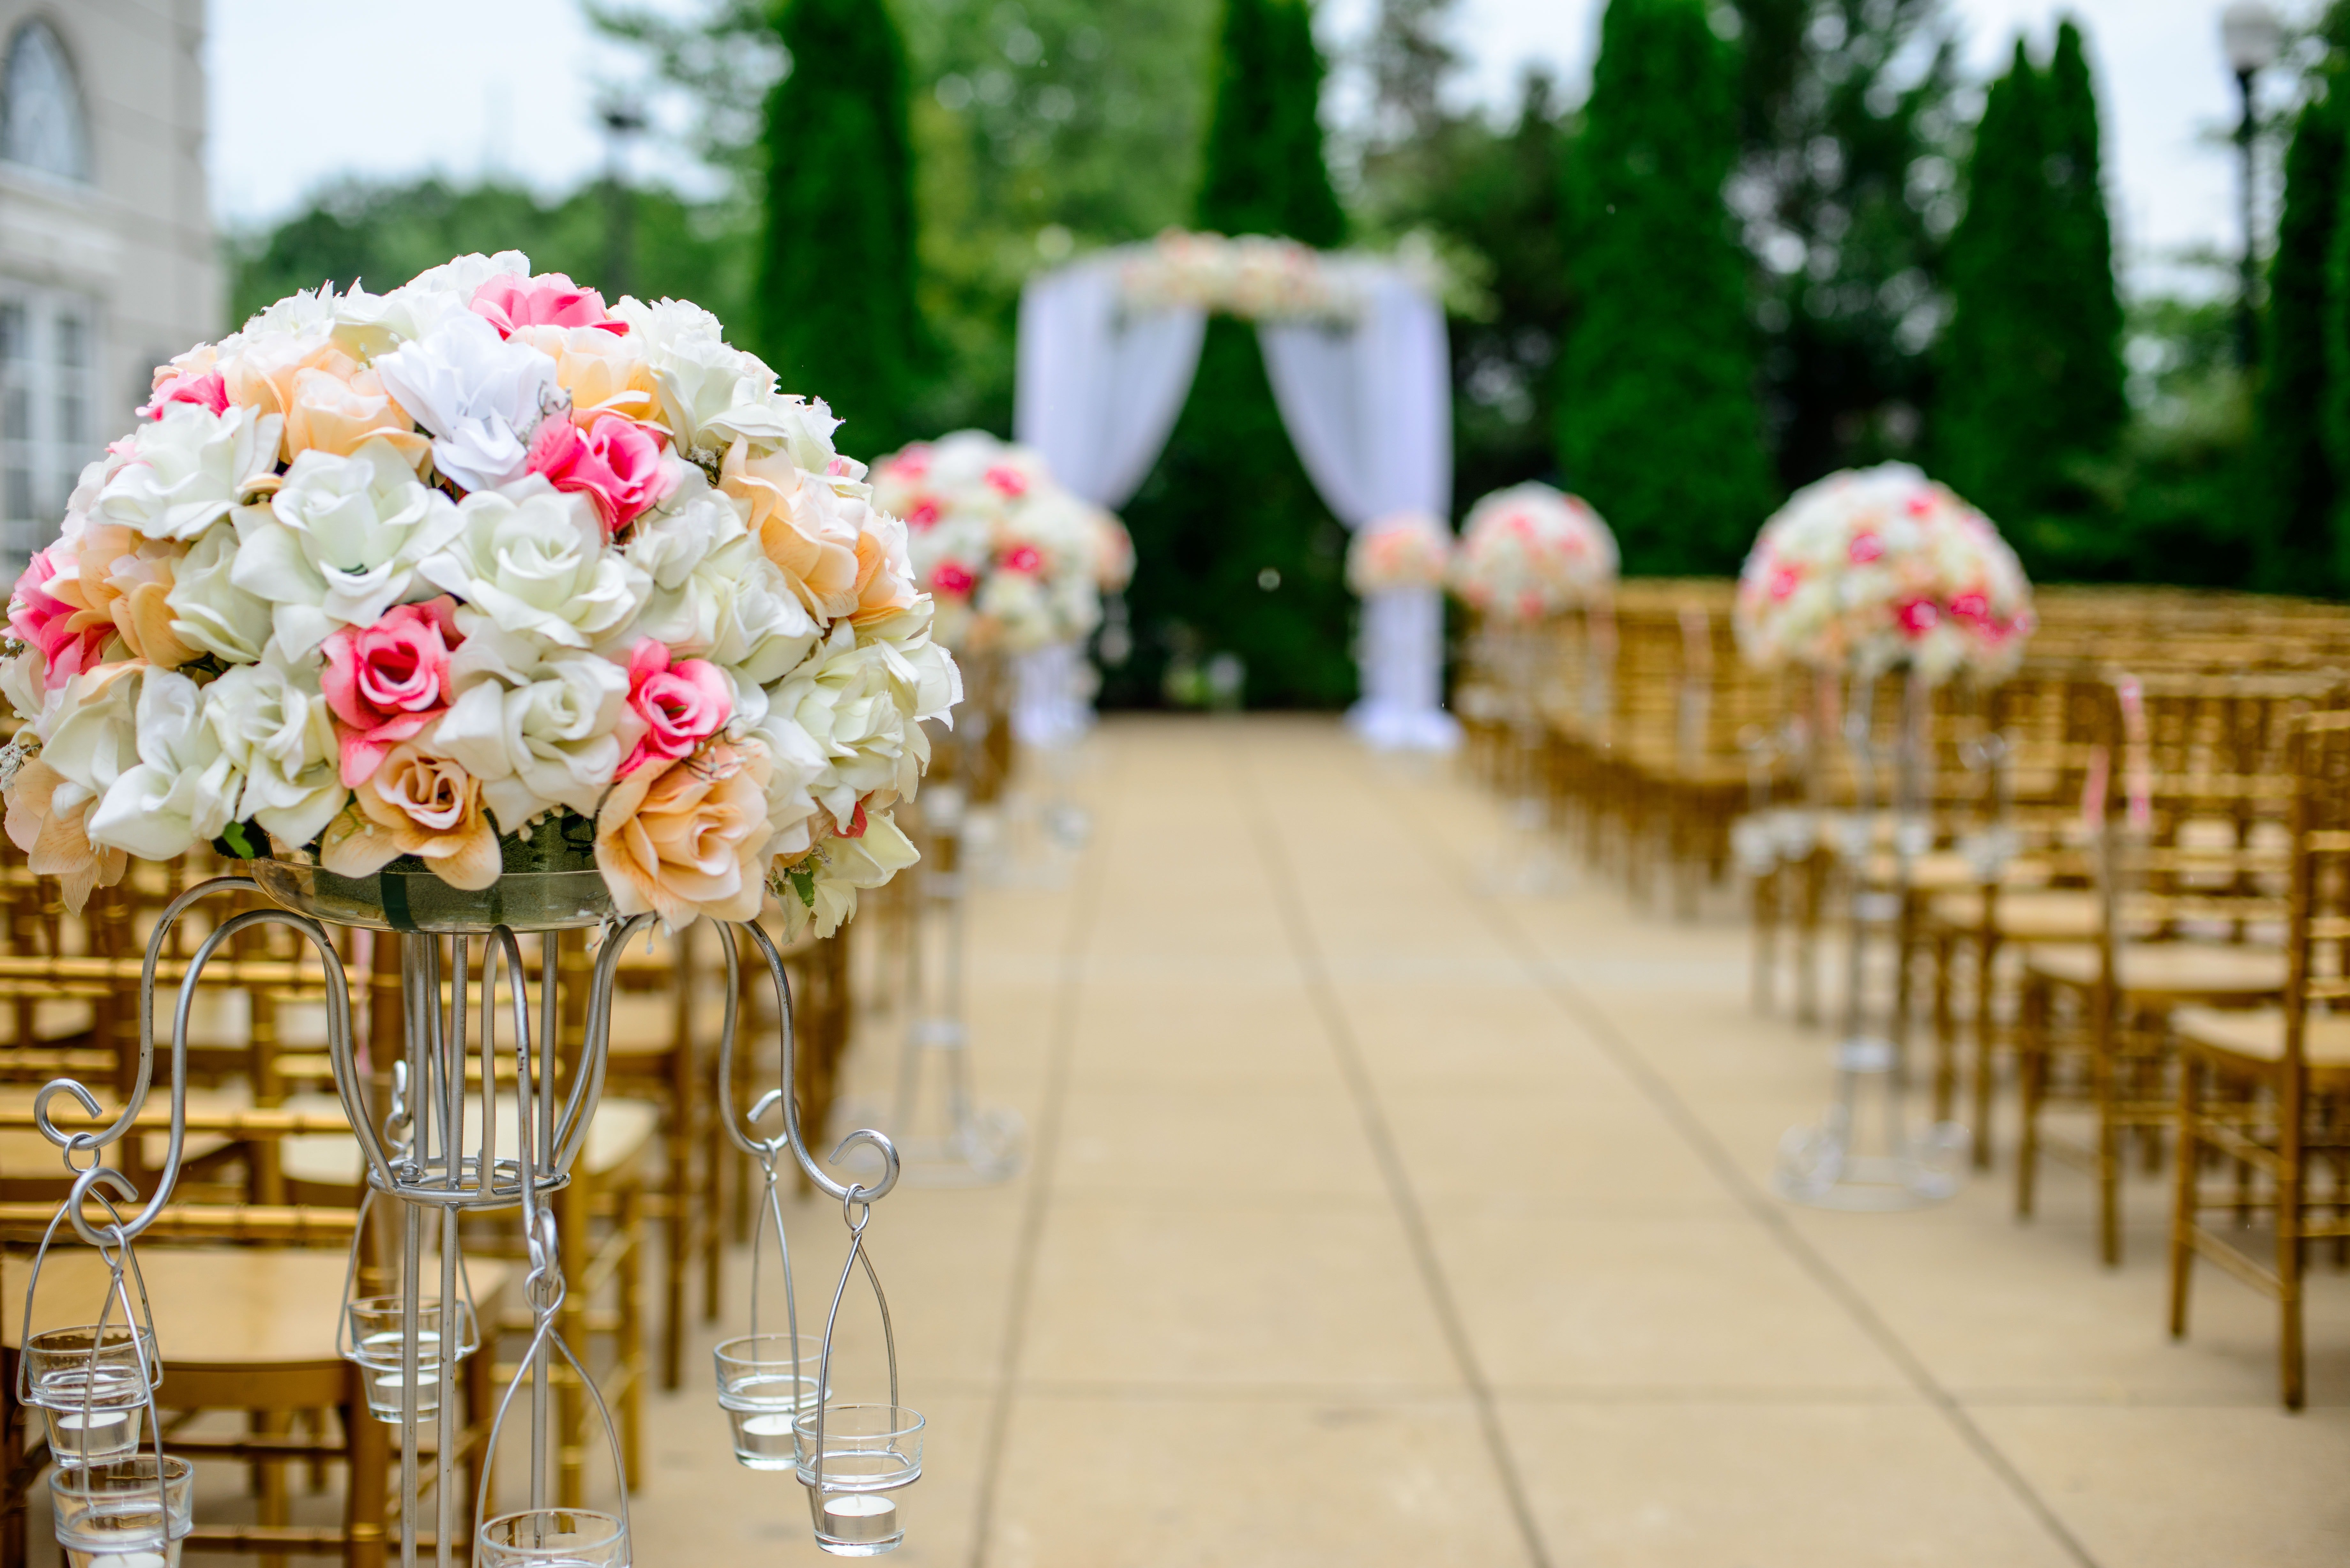 Rows of chair and flowers with a wedding arch in the background